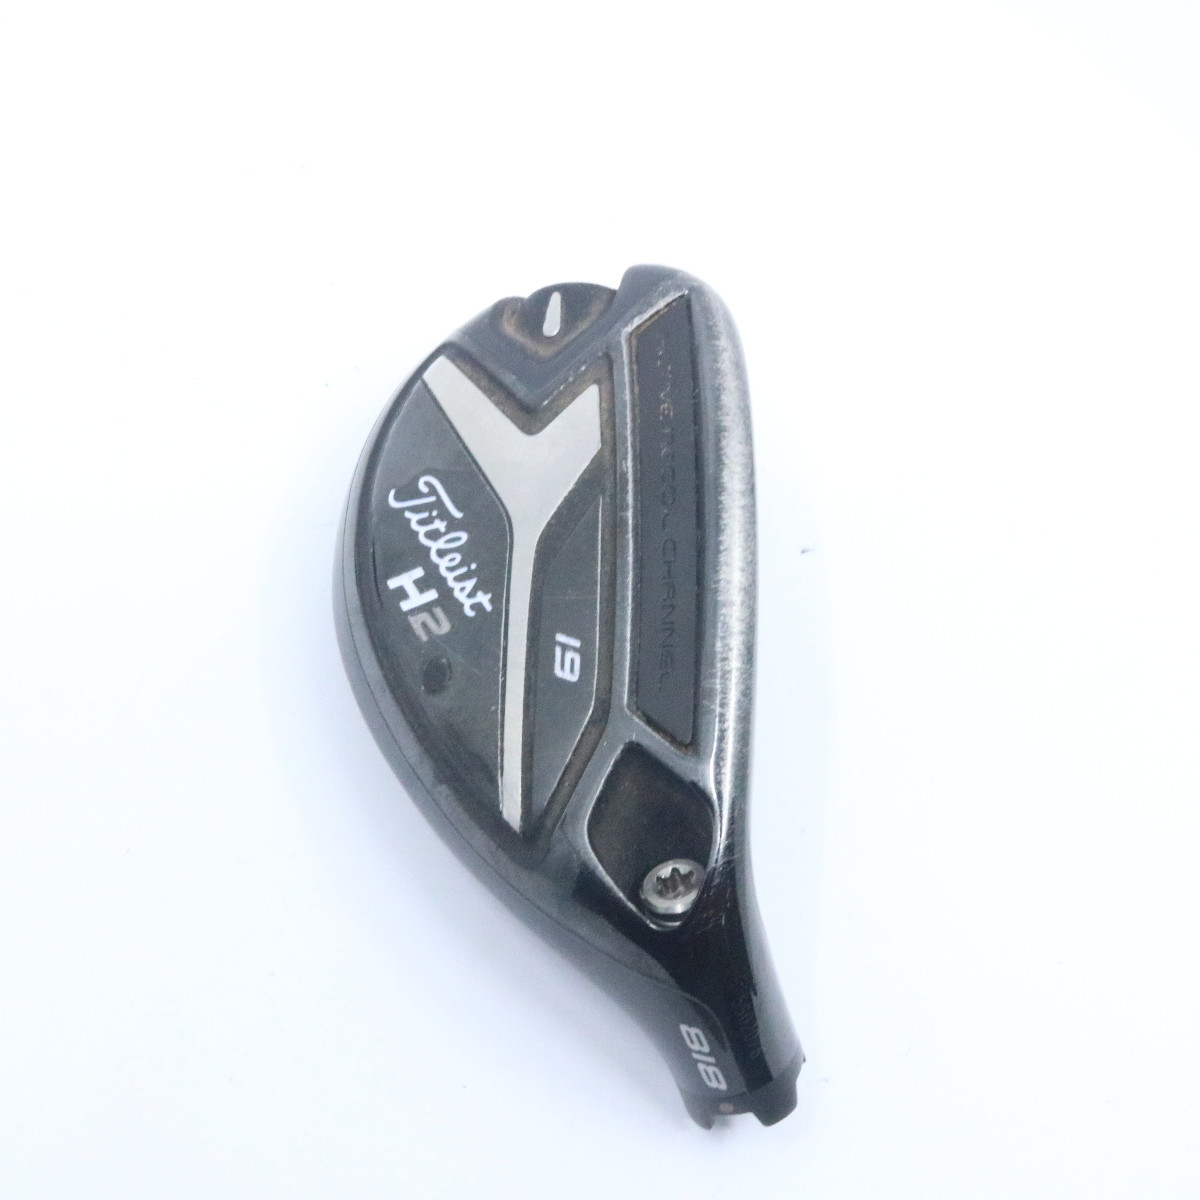 Cracked Head, Titleist 818 H2 Hybrid 21 Degrees Right-Handed Head